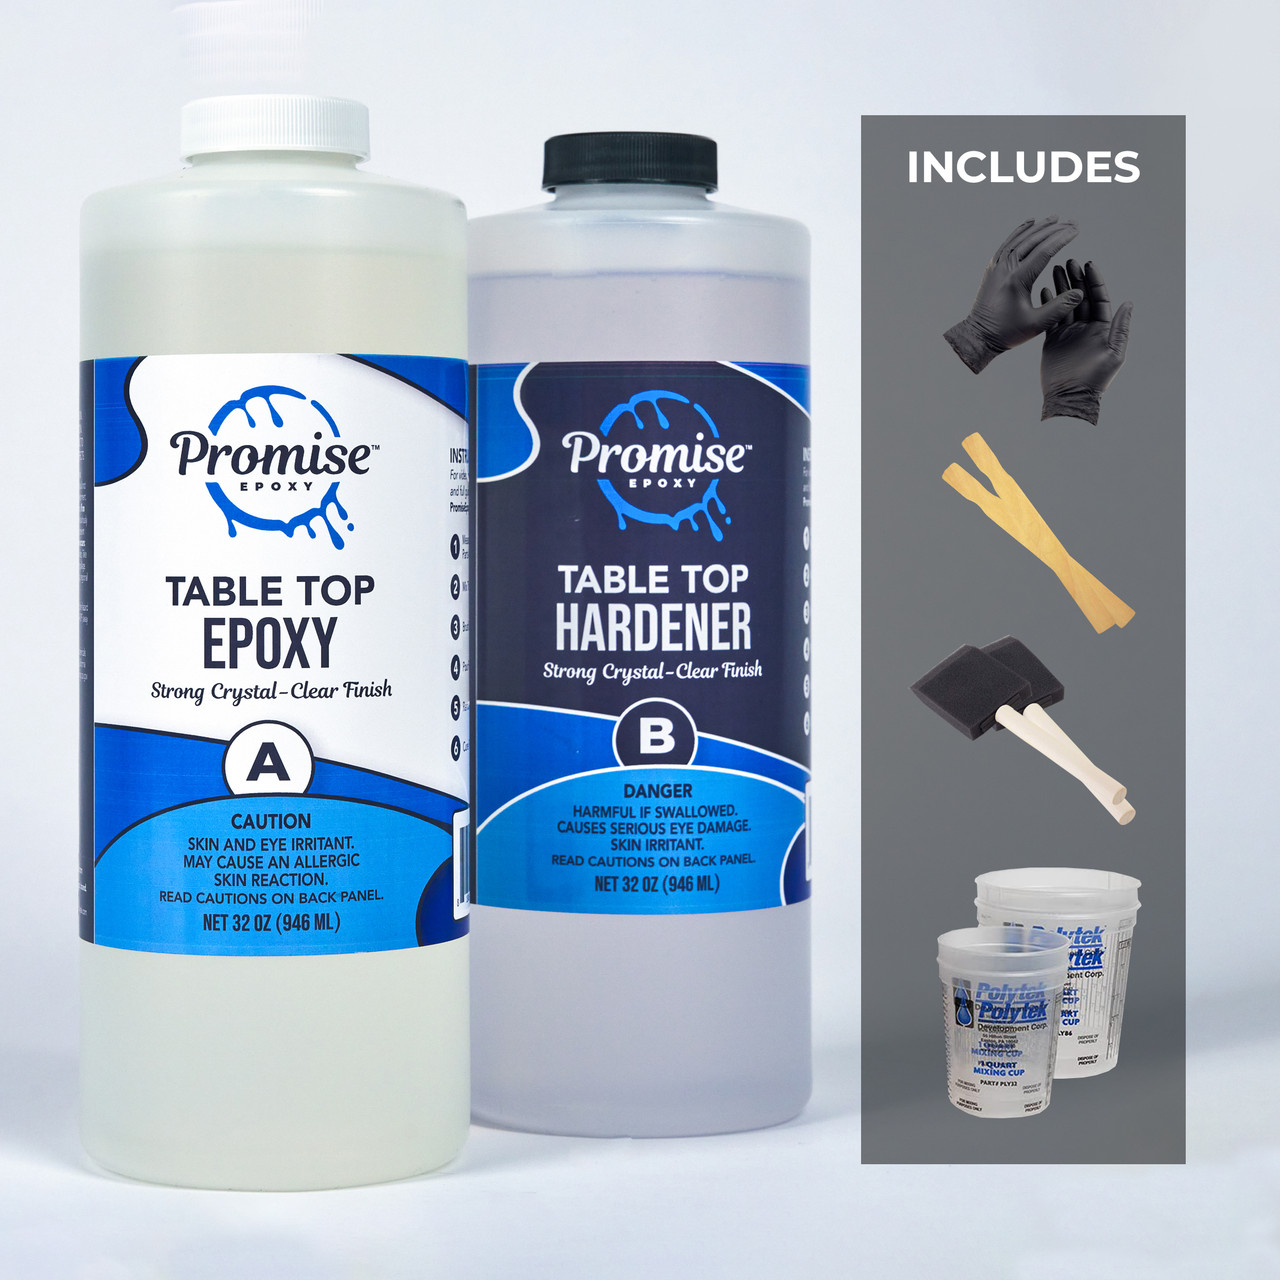 10 Best Epoxy For Tumblers In 2023 For Beginners & Professionals